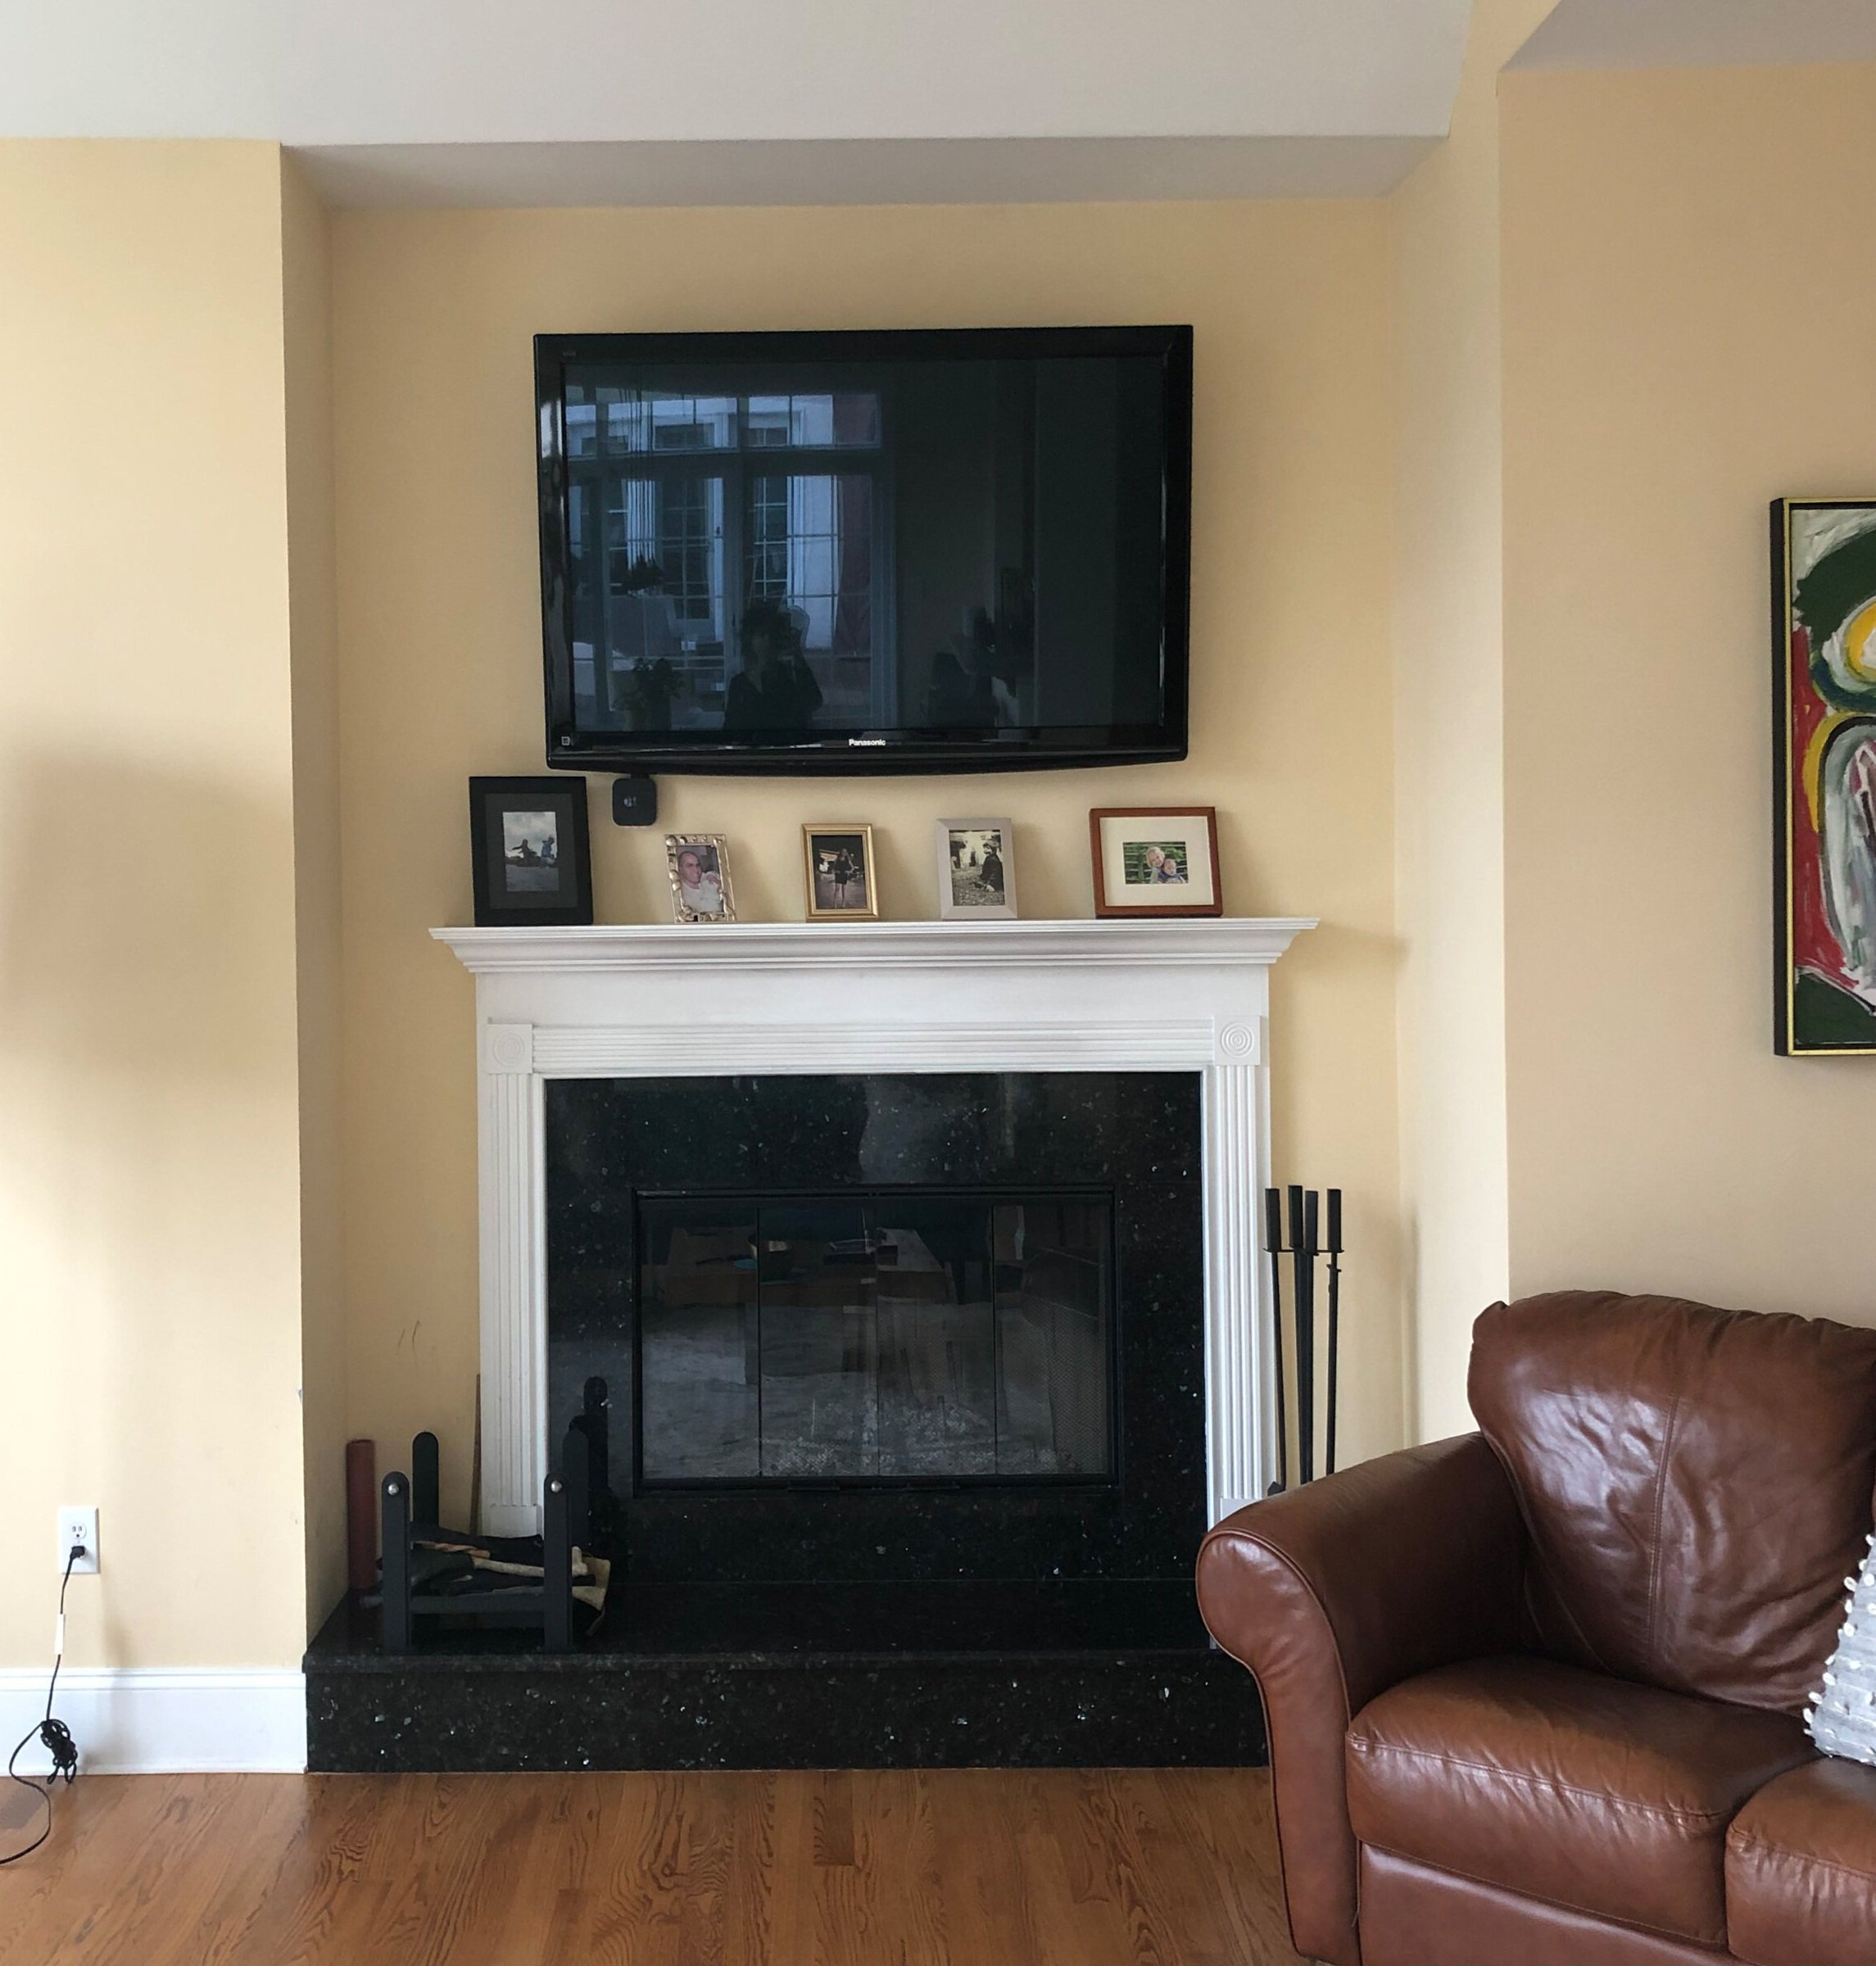  old fireplace, wood mantle, black stone hearth,  brown leather loveseat 